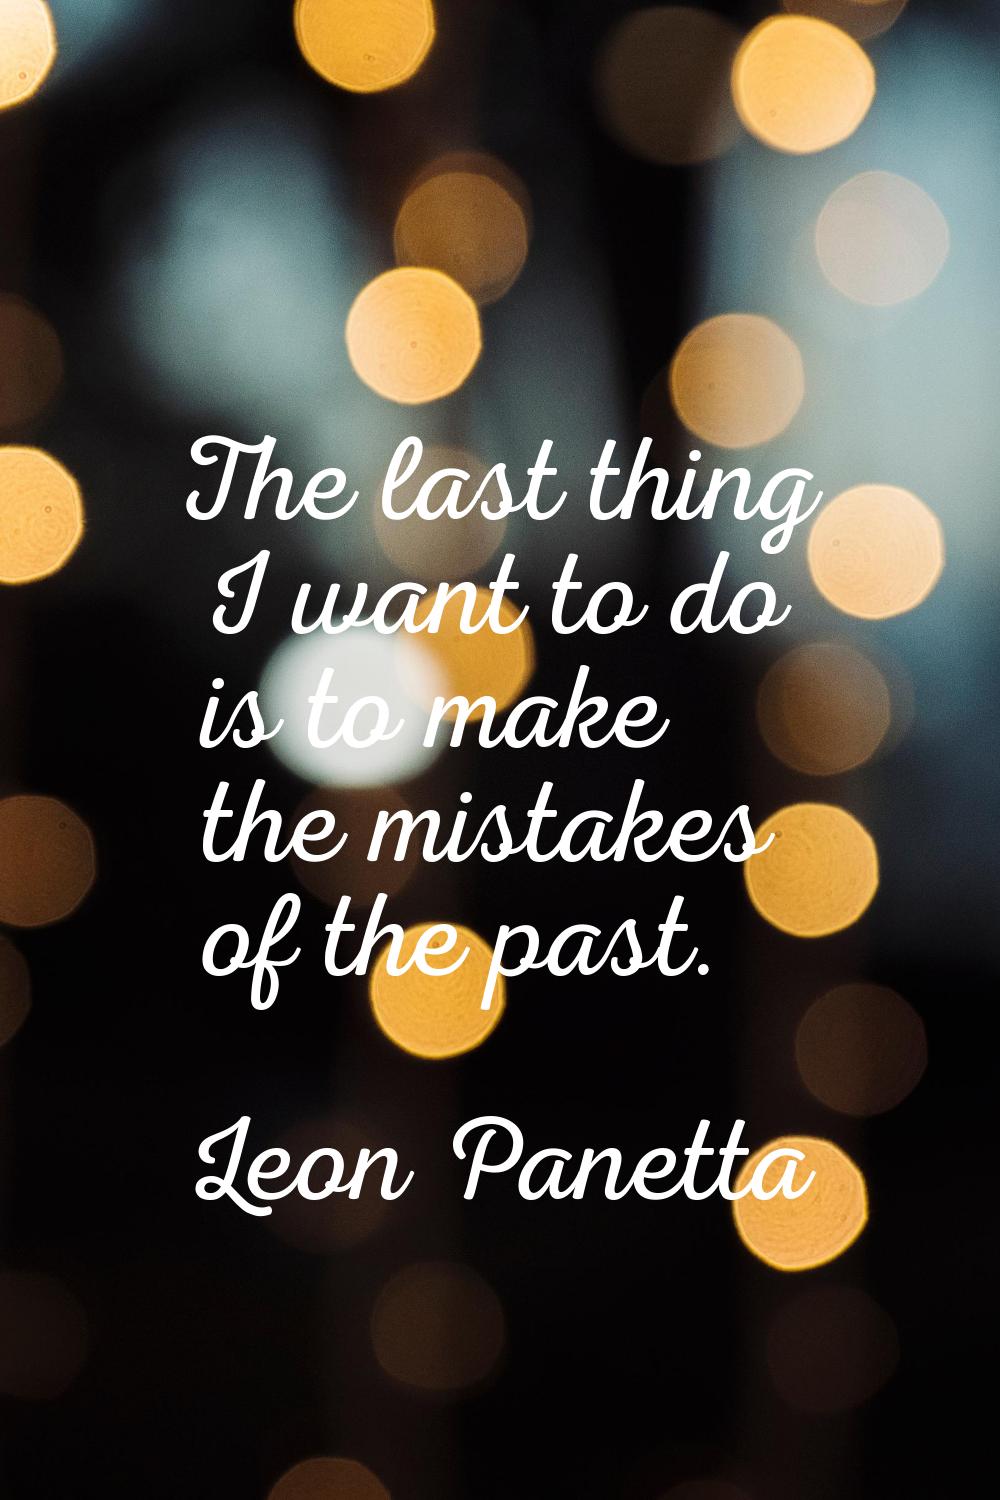 The last thing I want to do is to make the mistakes of the past.